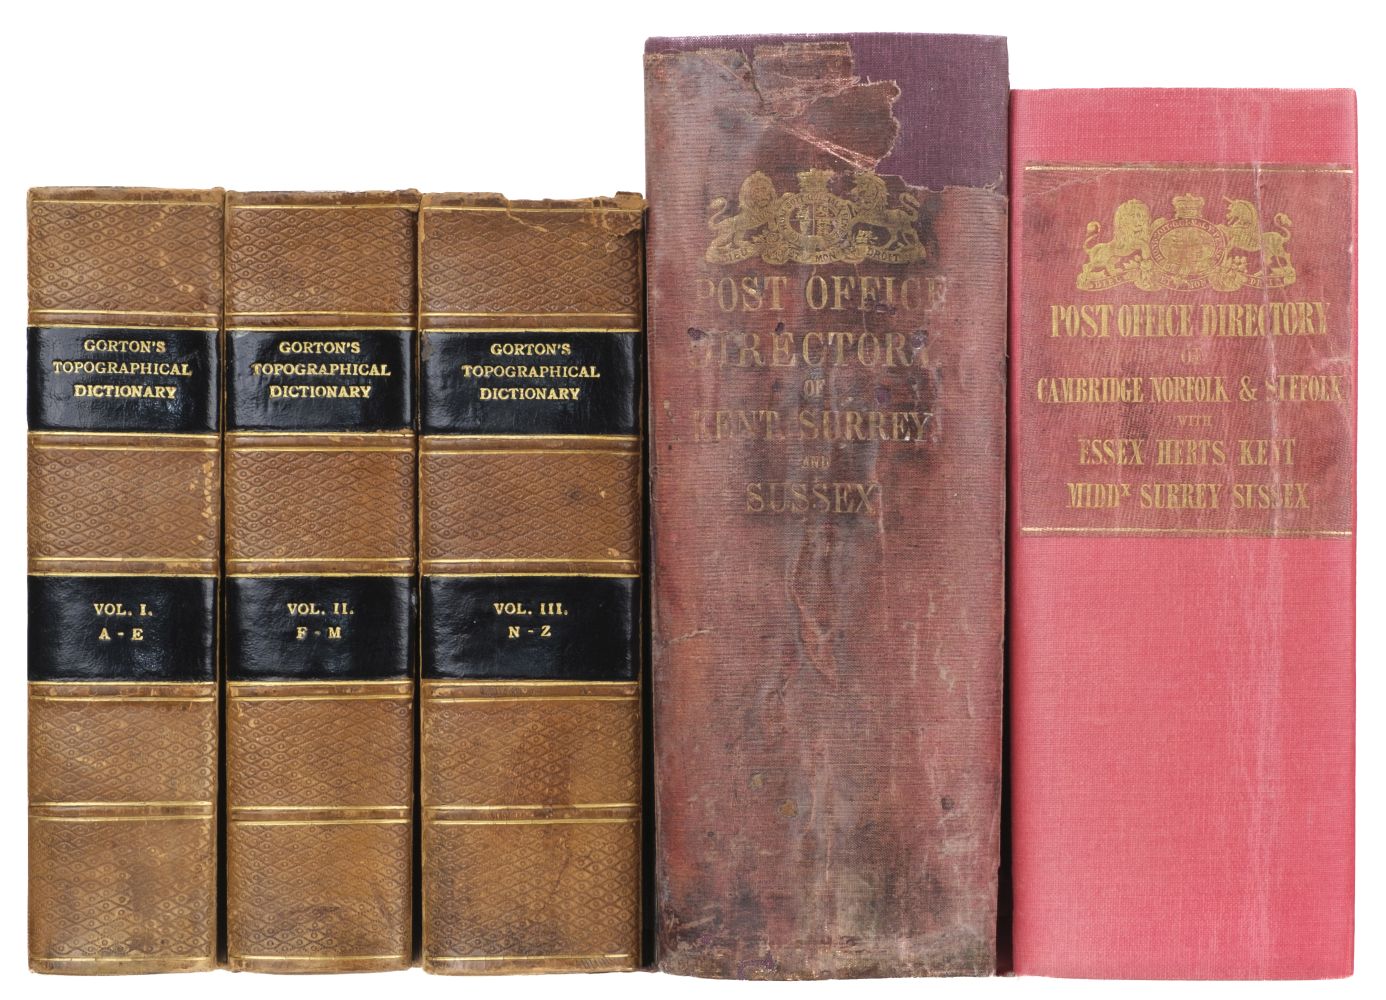 Gorton (John). A Topographical Dictionary of Great Britain and Ireland..., 3 volumes, 1833